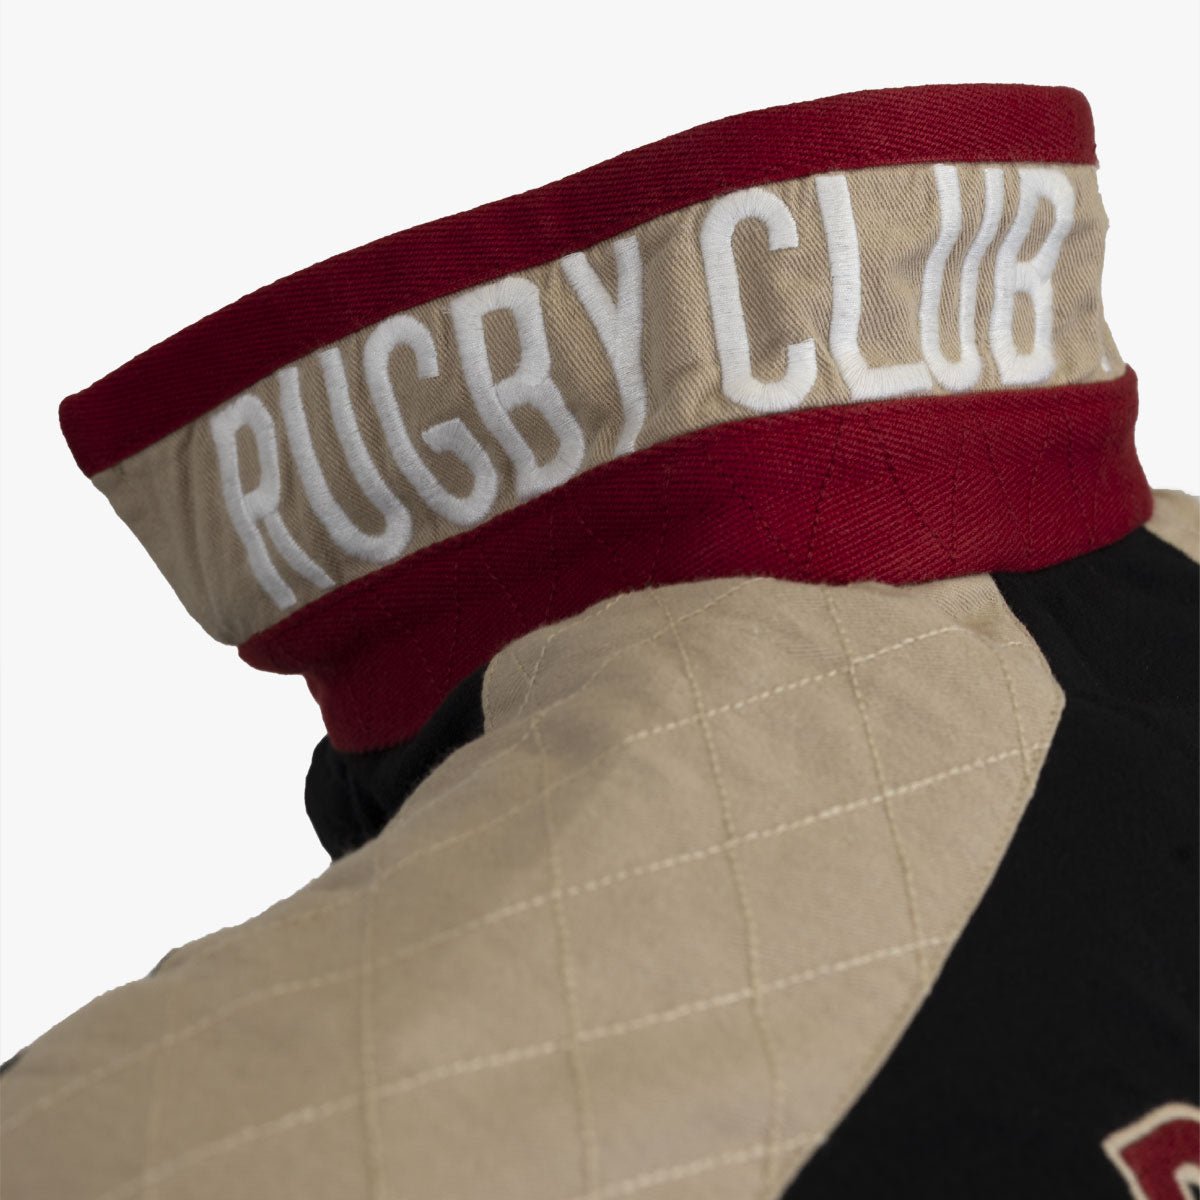 Polo Manches Courtes Rugby - RCT R122PC01-NO9-S - Blacks Legend